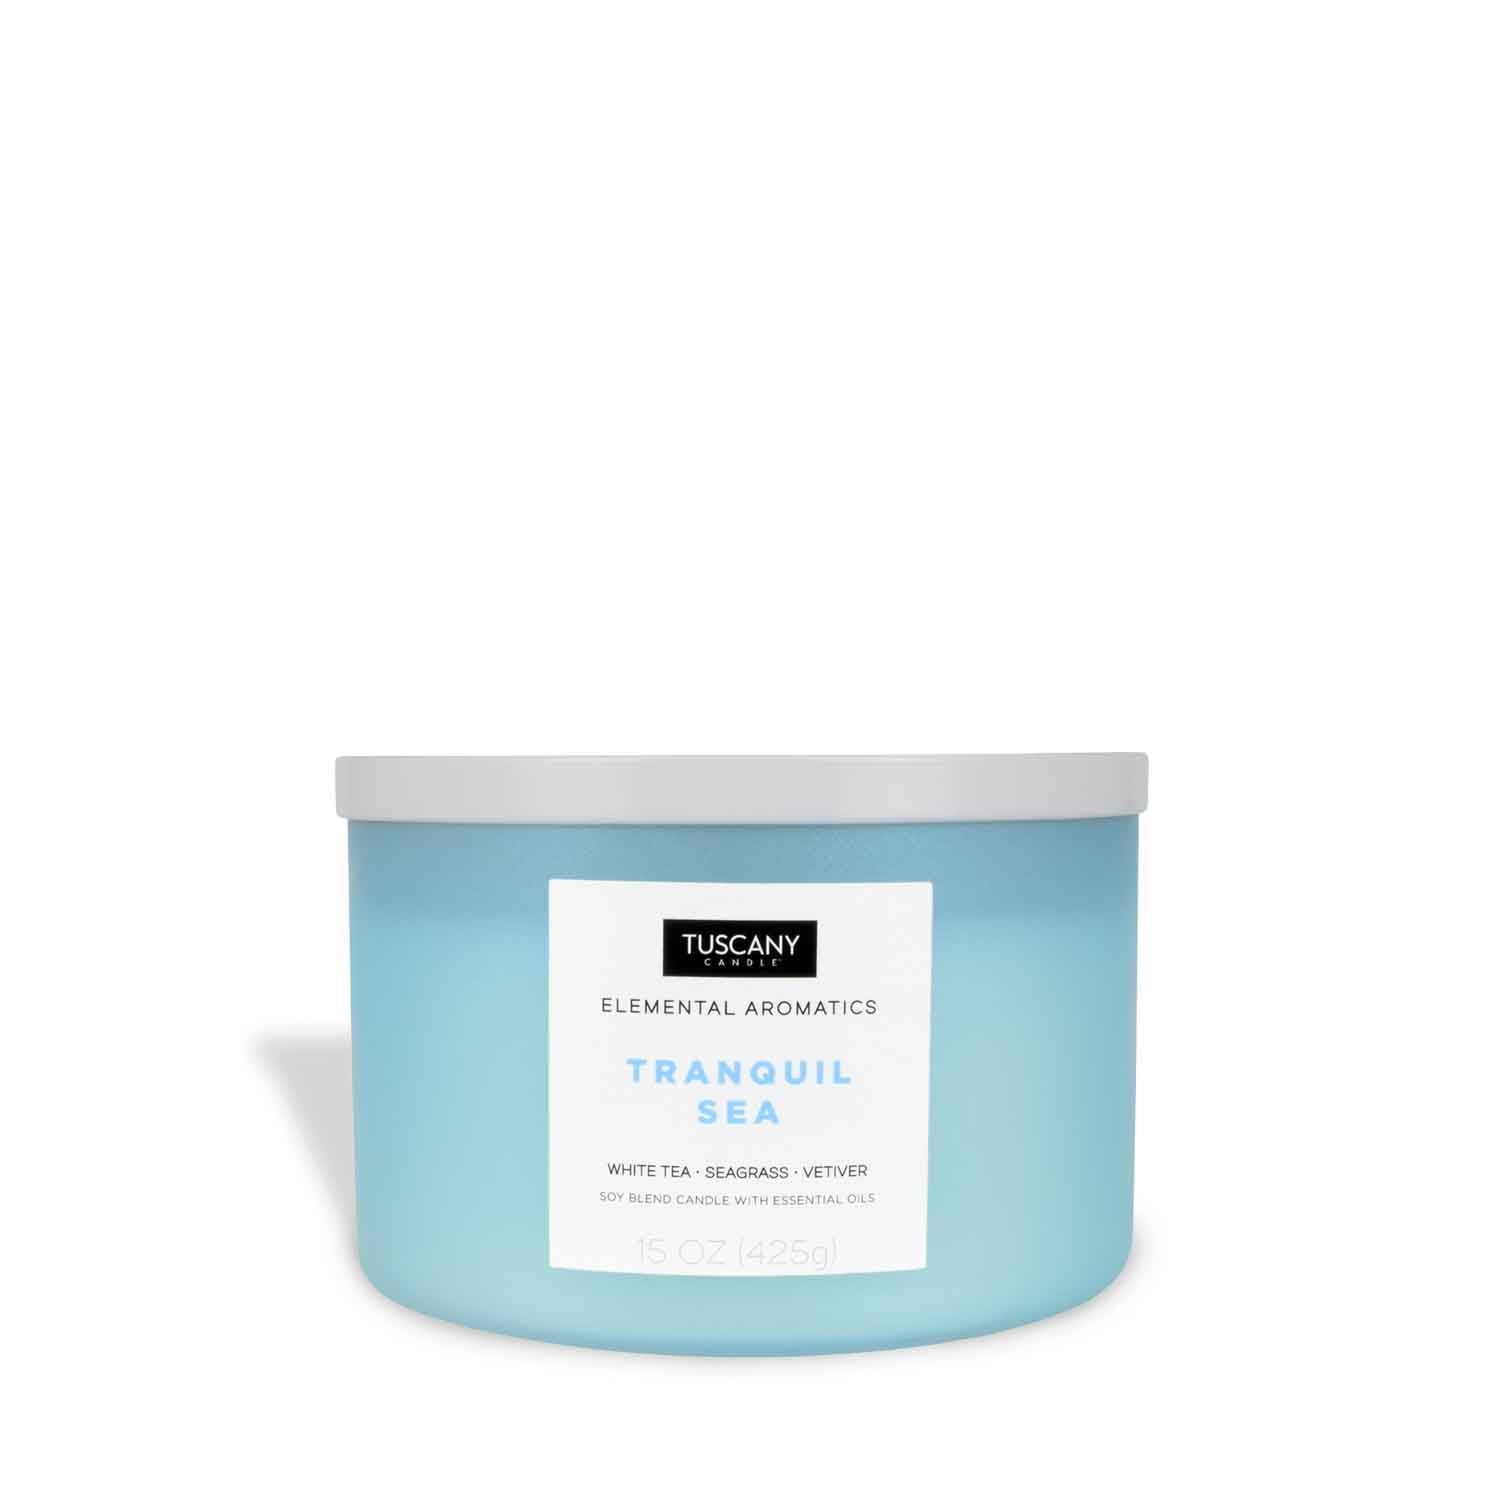 A Tranquil Sea Scented Jar Candle (15oz) – Elemental Aromatics Collection by Tuscany Candle® EVD, with a serene blue lid, containing a scented candle that embodies the calming essence of the ocean.